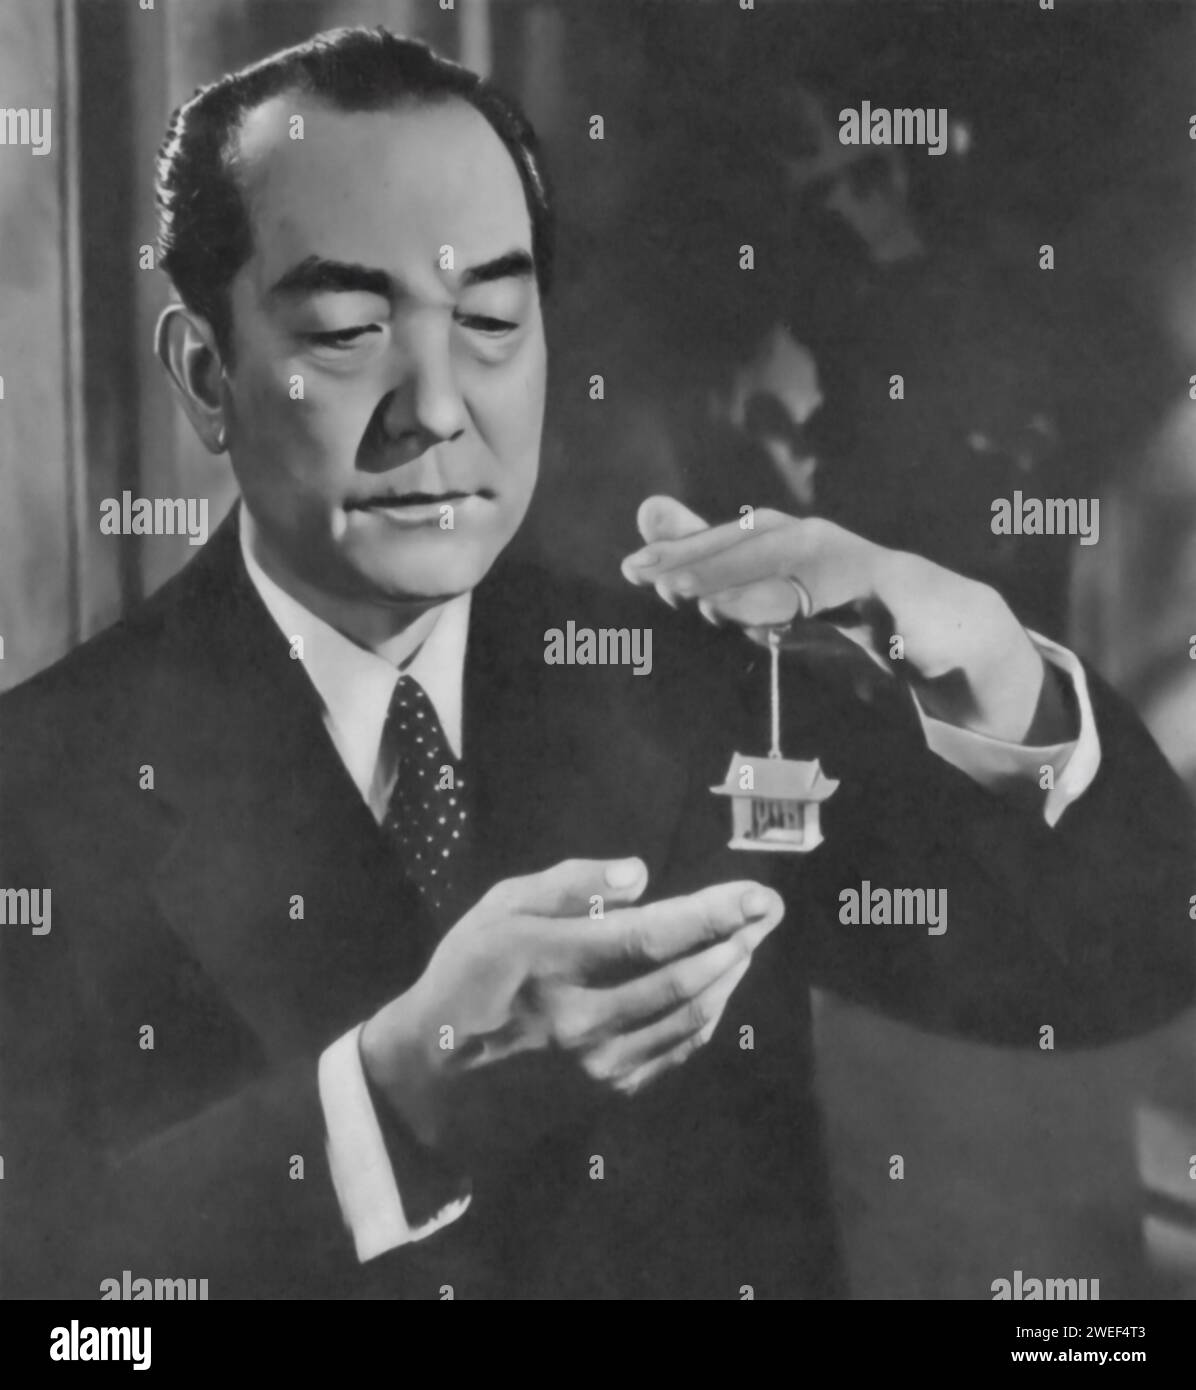 A portrait of Sessue Hayakawa, an actor known for his powerful performance in the film 'Three Came Home' (1950). In this World War II drama, Hayakawa plays Colonel Suga, a Japanese camp commander. His nuanced portrayal adds complexity to the character, depicting him as both a stern authority figure and a man with his own internal conflicts. Stock Photo